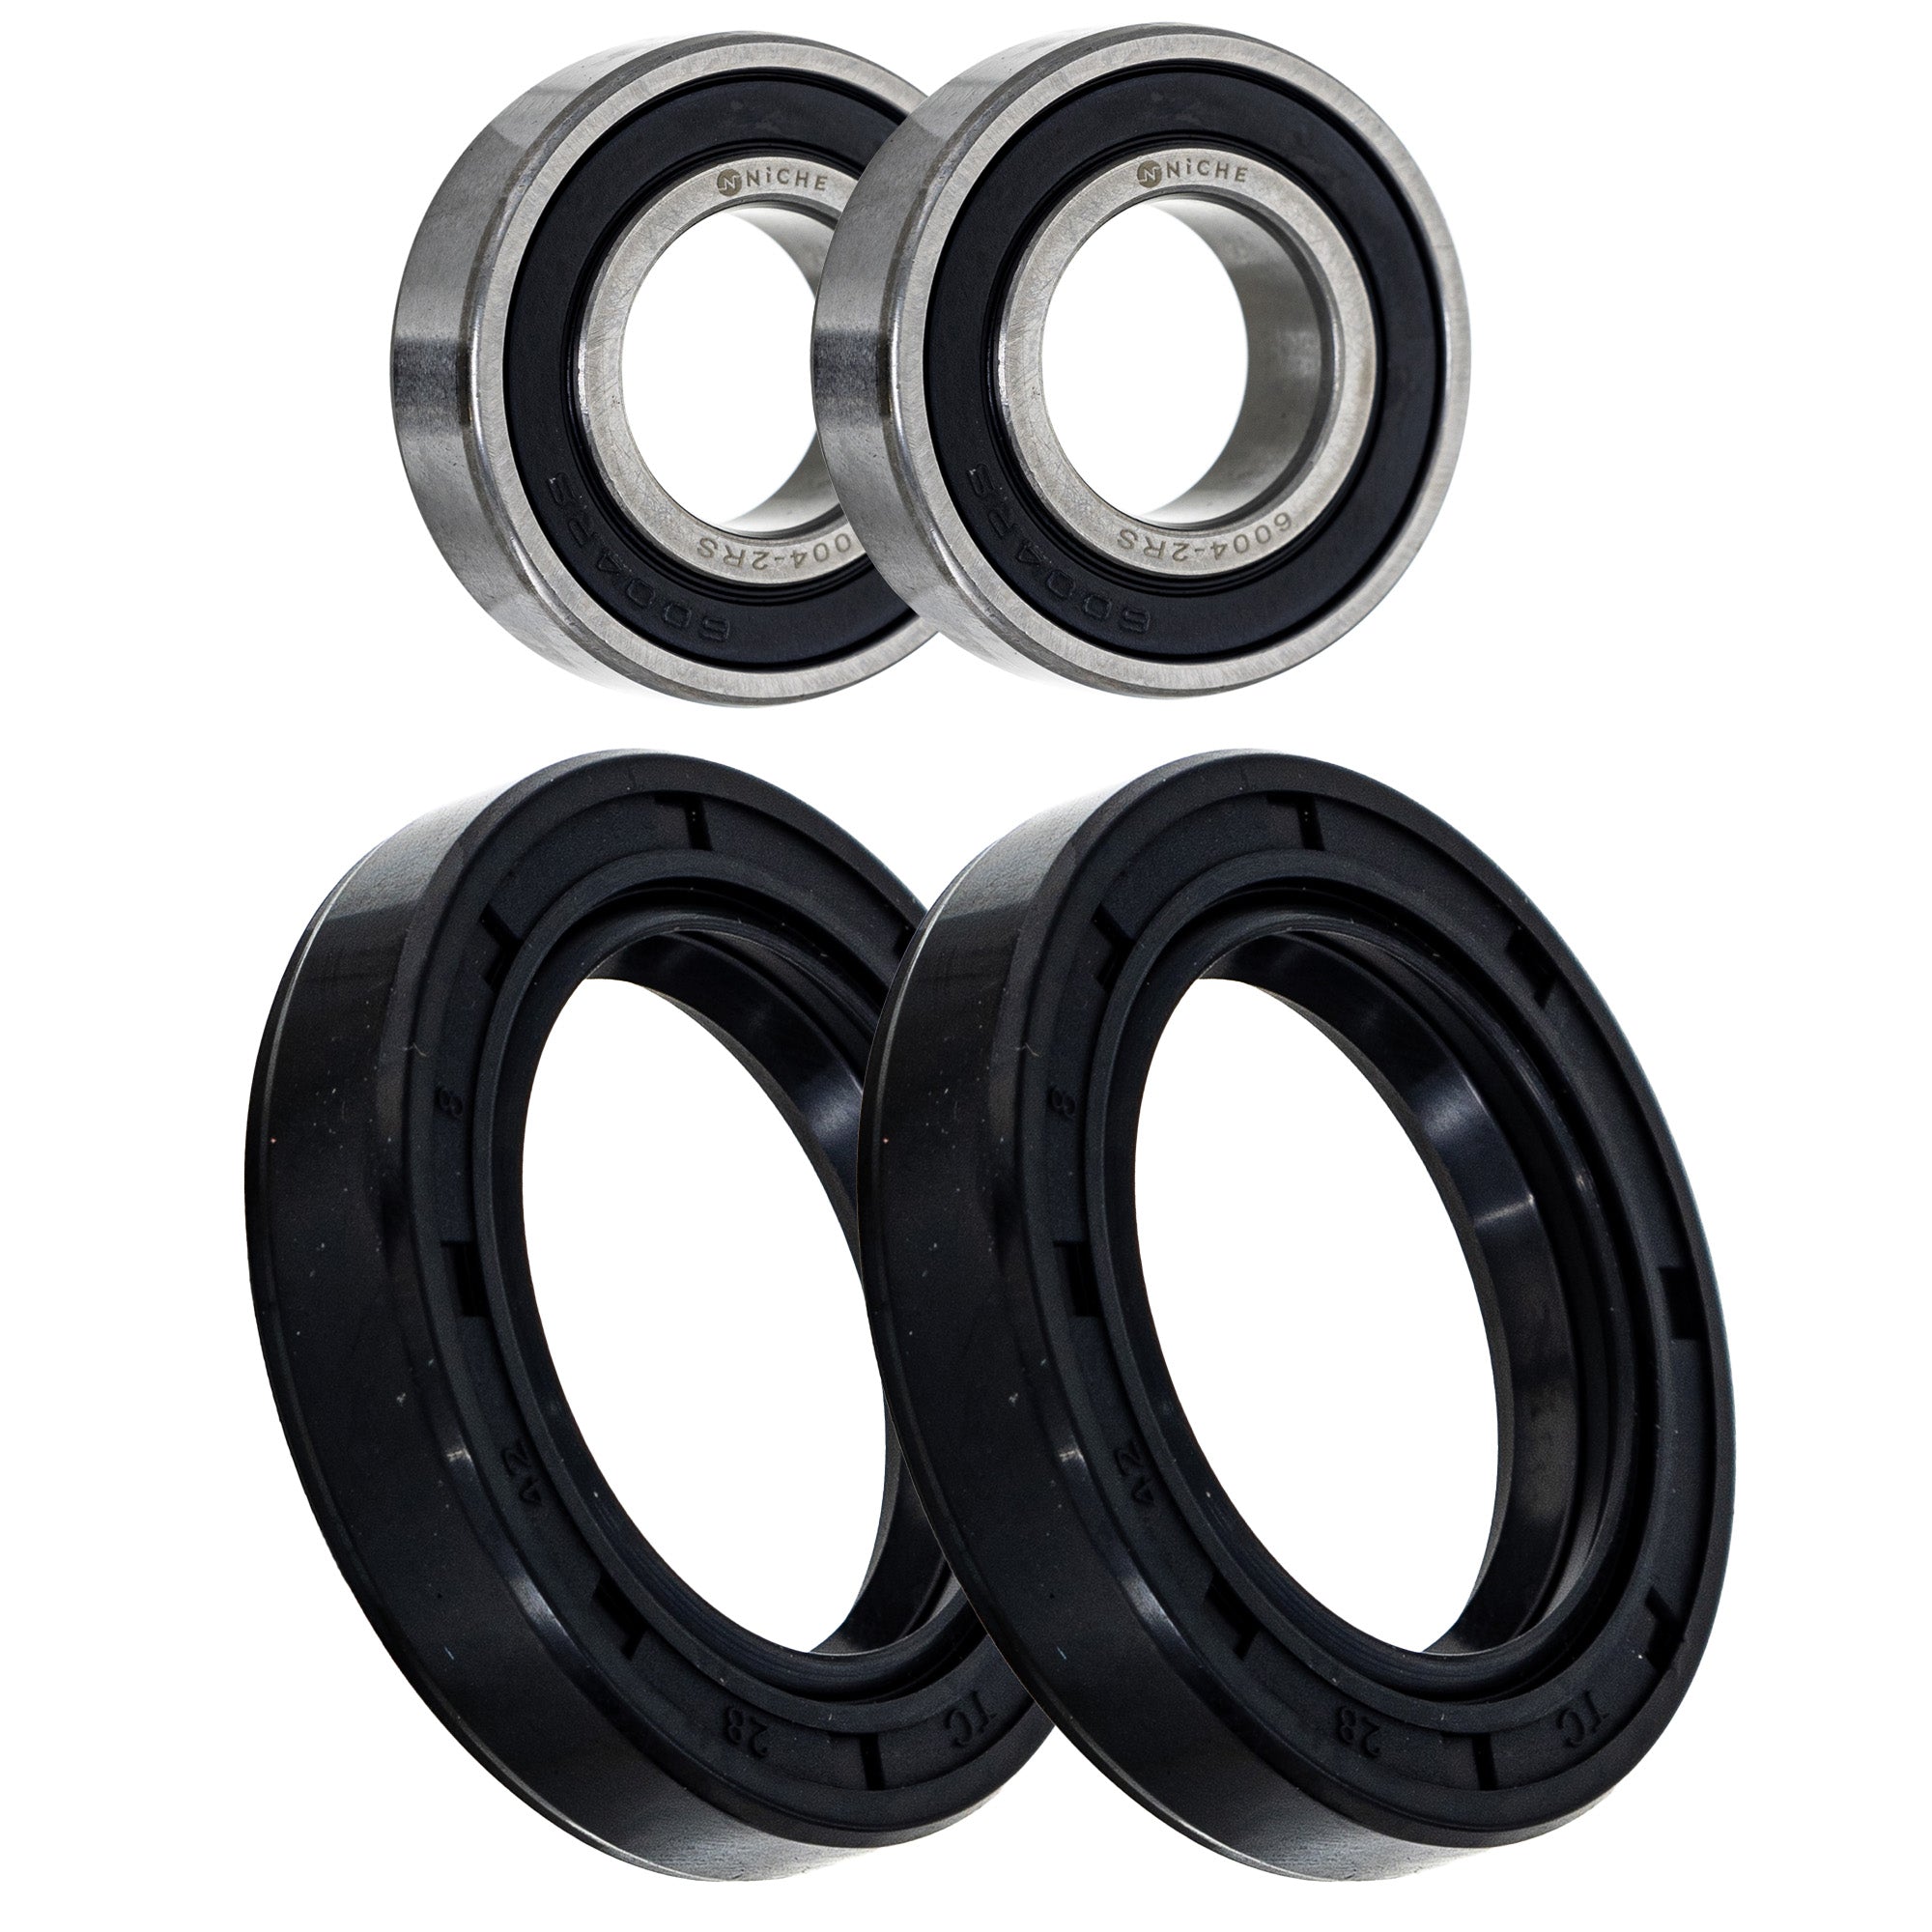 Wheel Bearing Seal Kit for zOTHER Ref No TRX250 Super ST1100 Shadow NICHE MK1009182